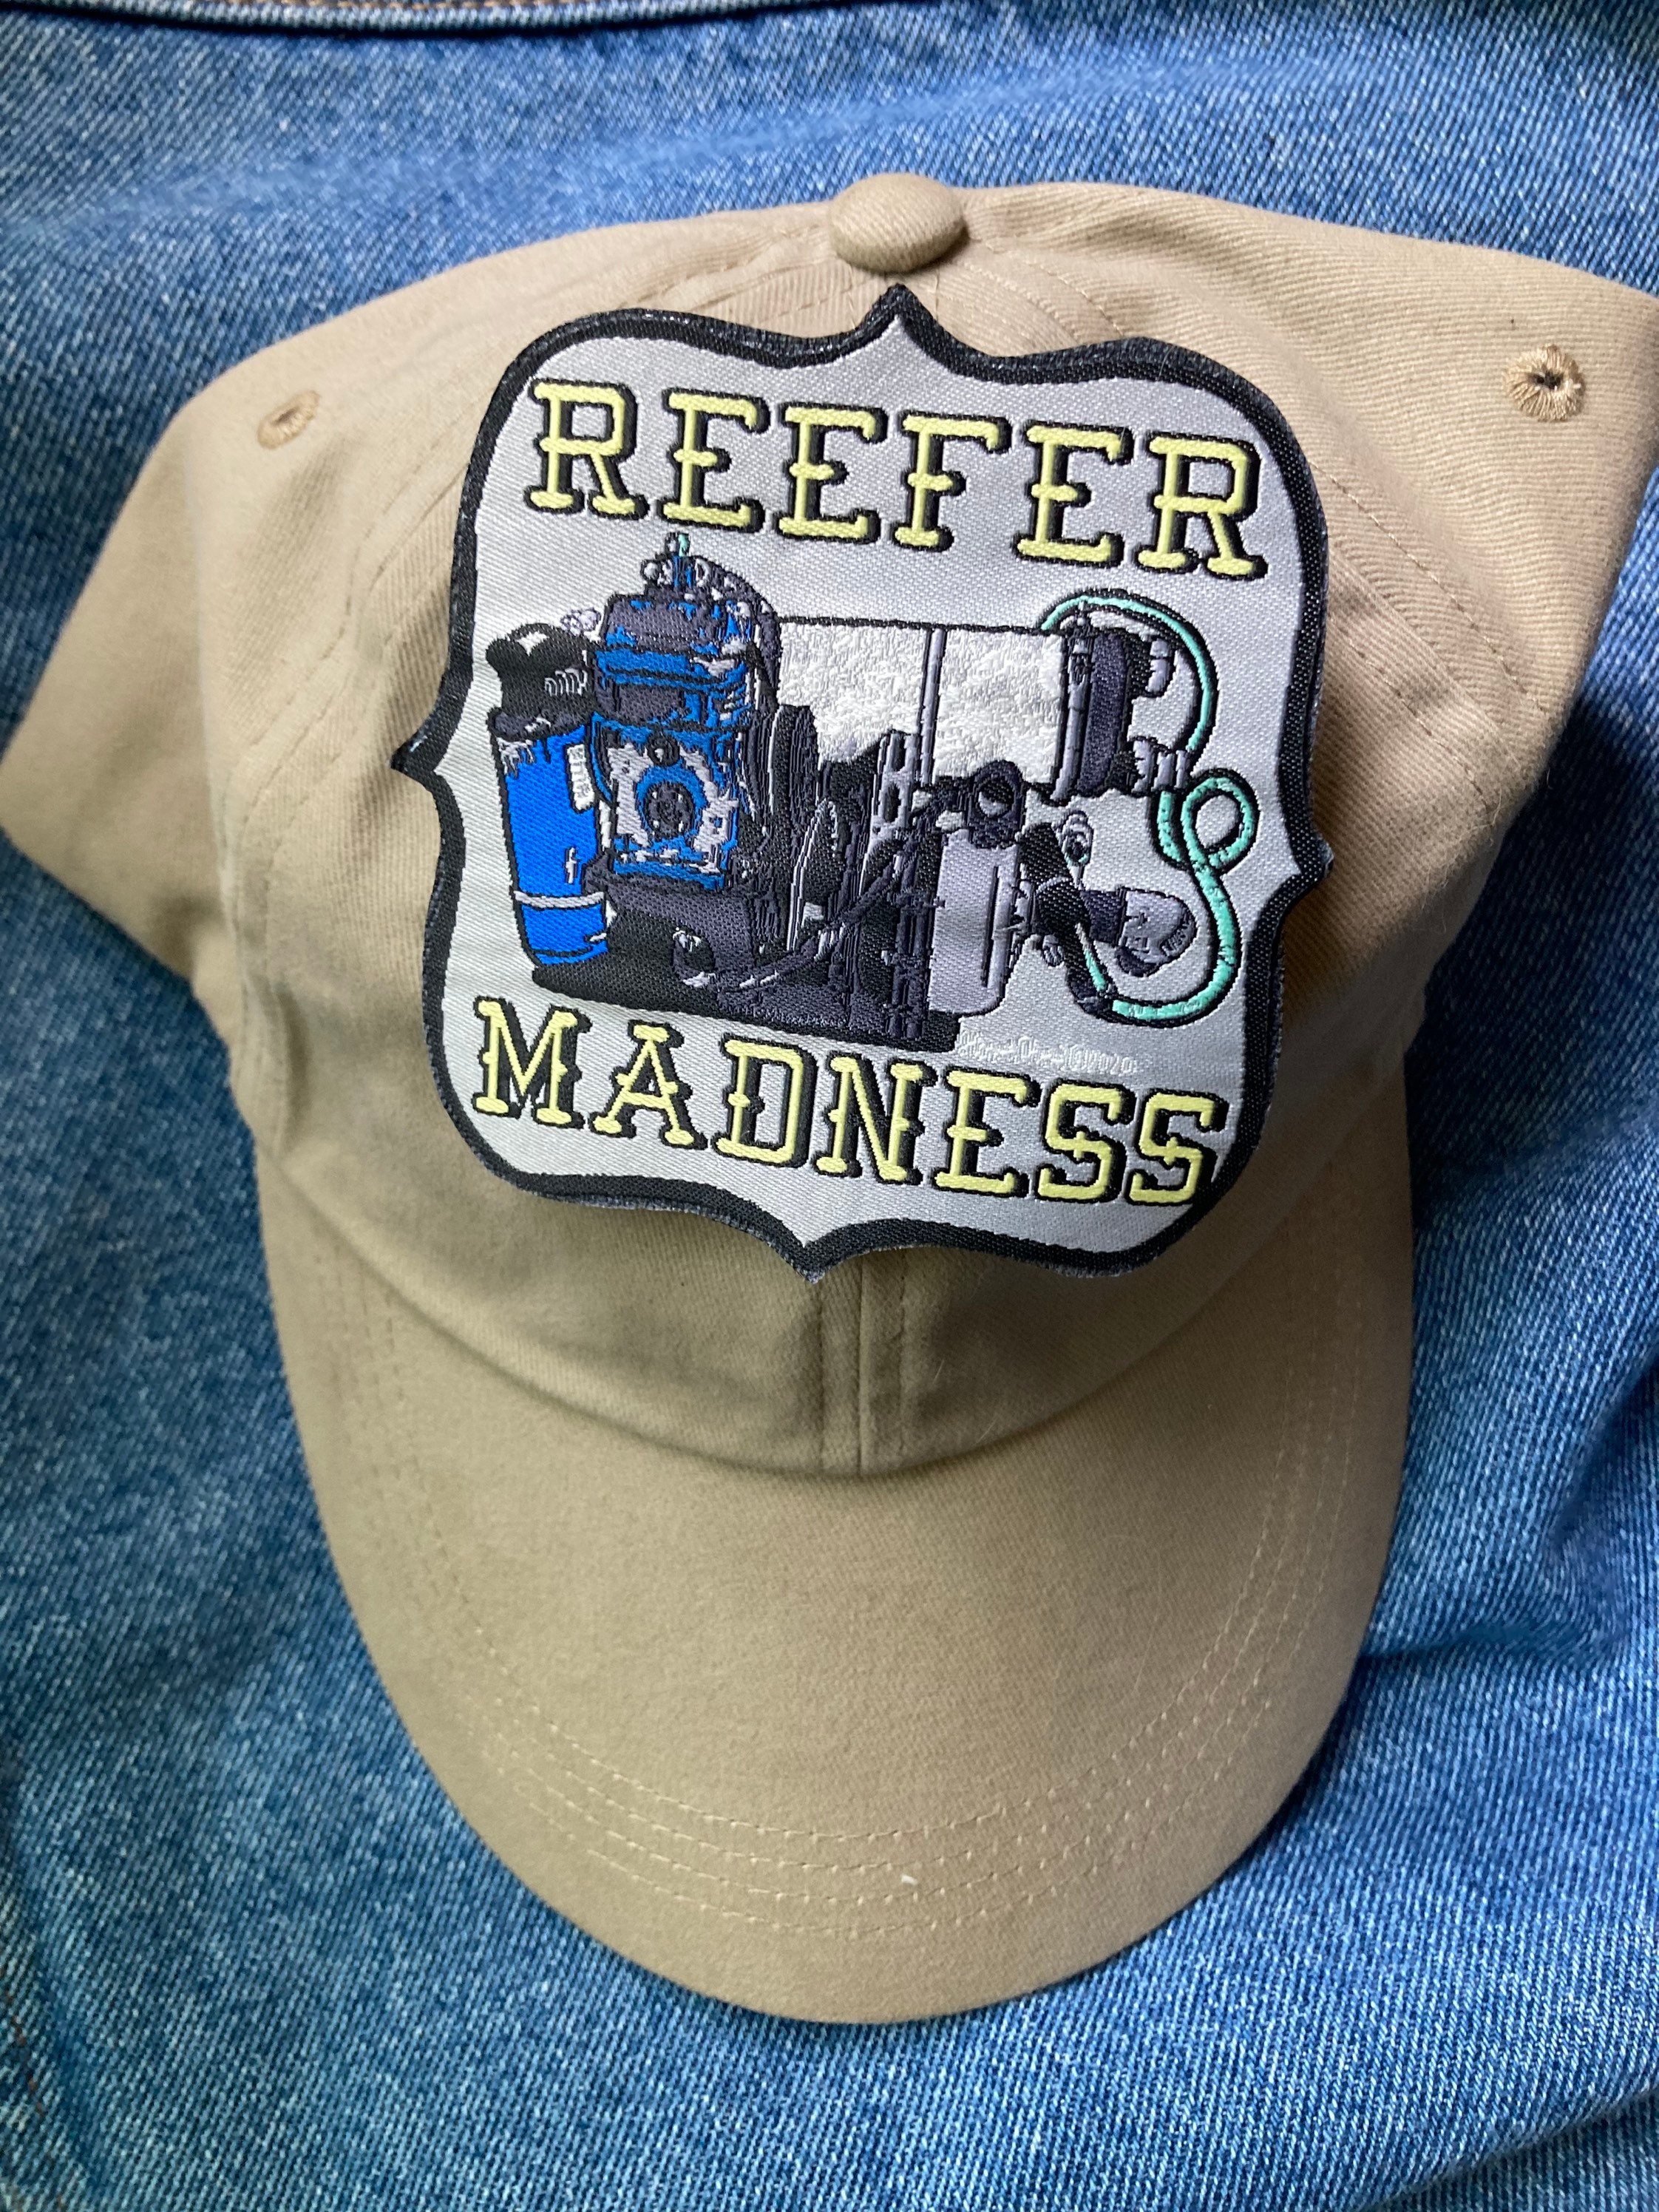 Reefer madness hat | Etsy